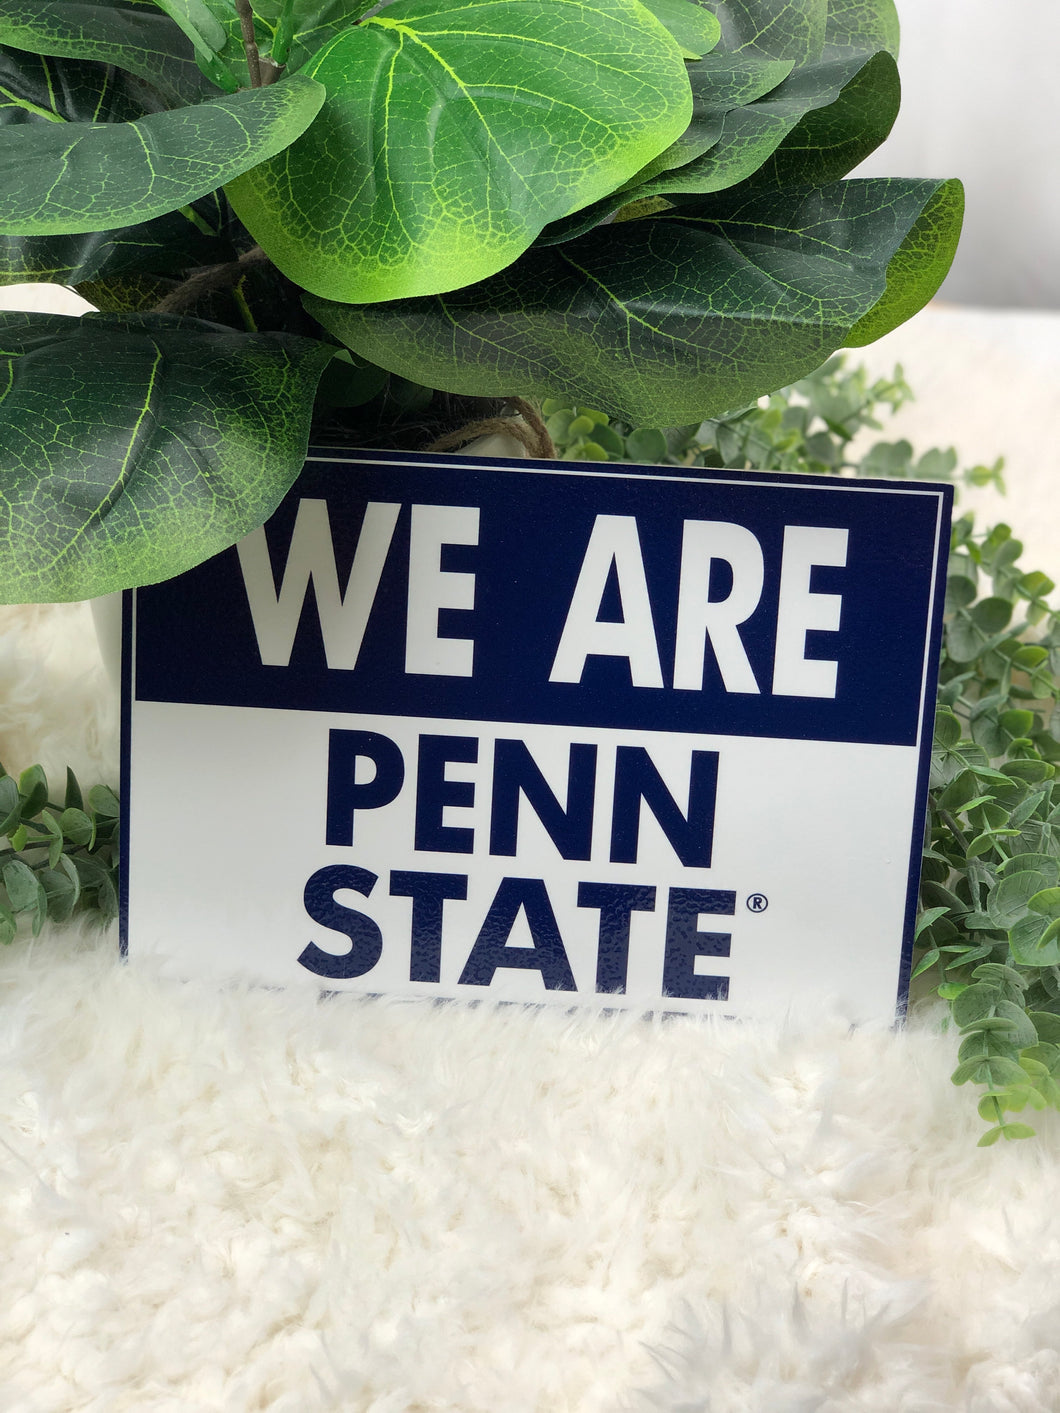 WE ARE PENN STATE BAR SIGN